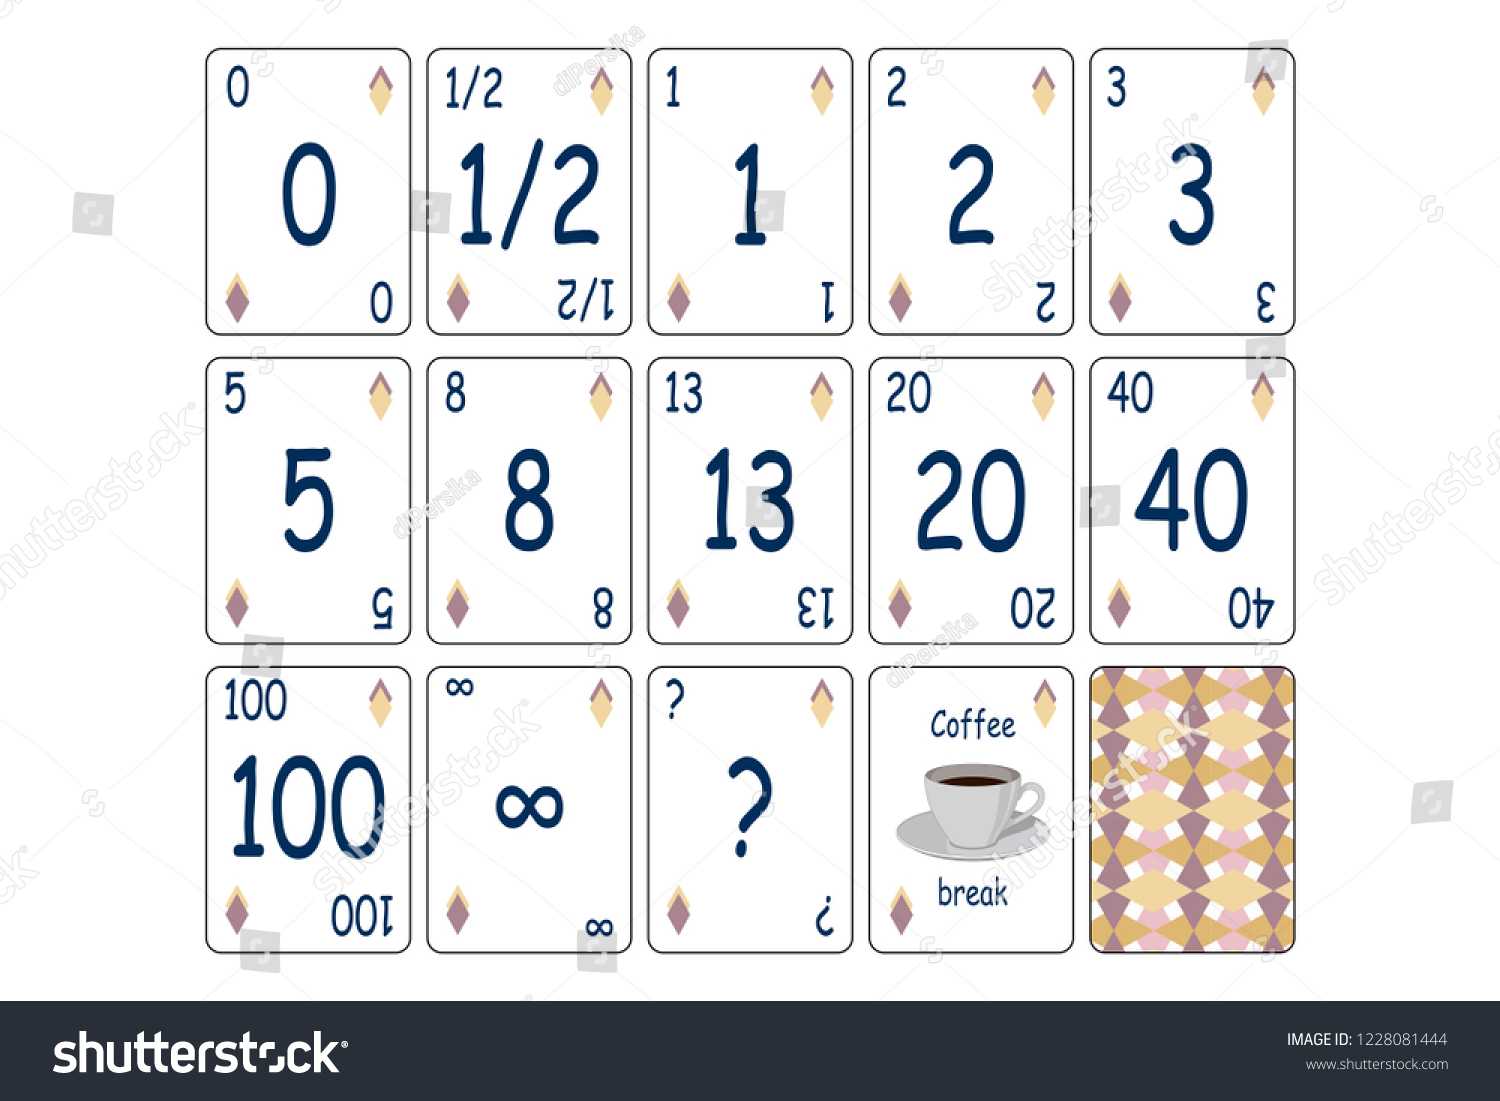 Web Print Concept Illustration Agile Scrum Stock Image In Planning Poker Cards Template